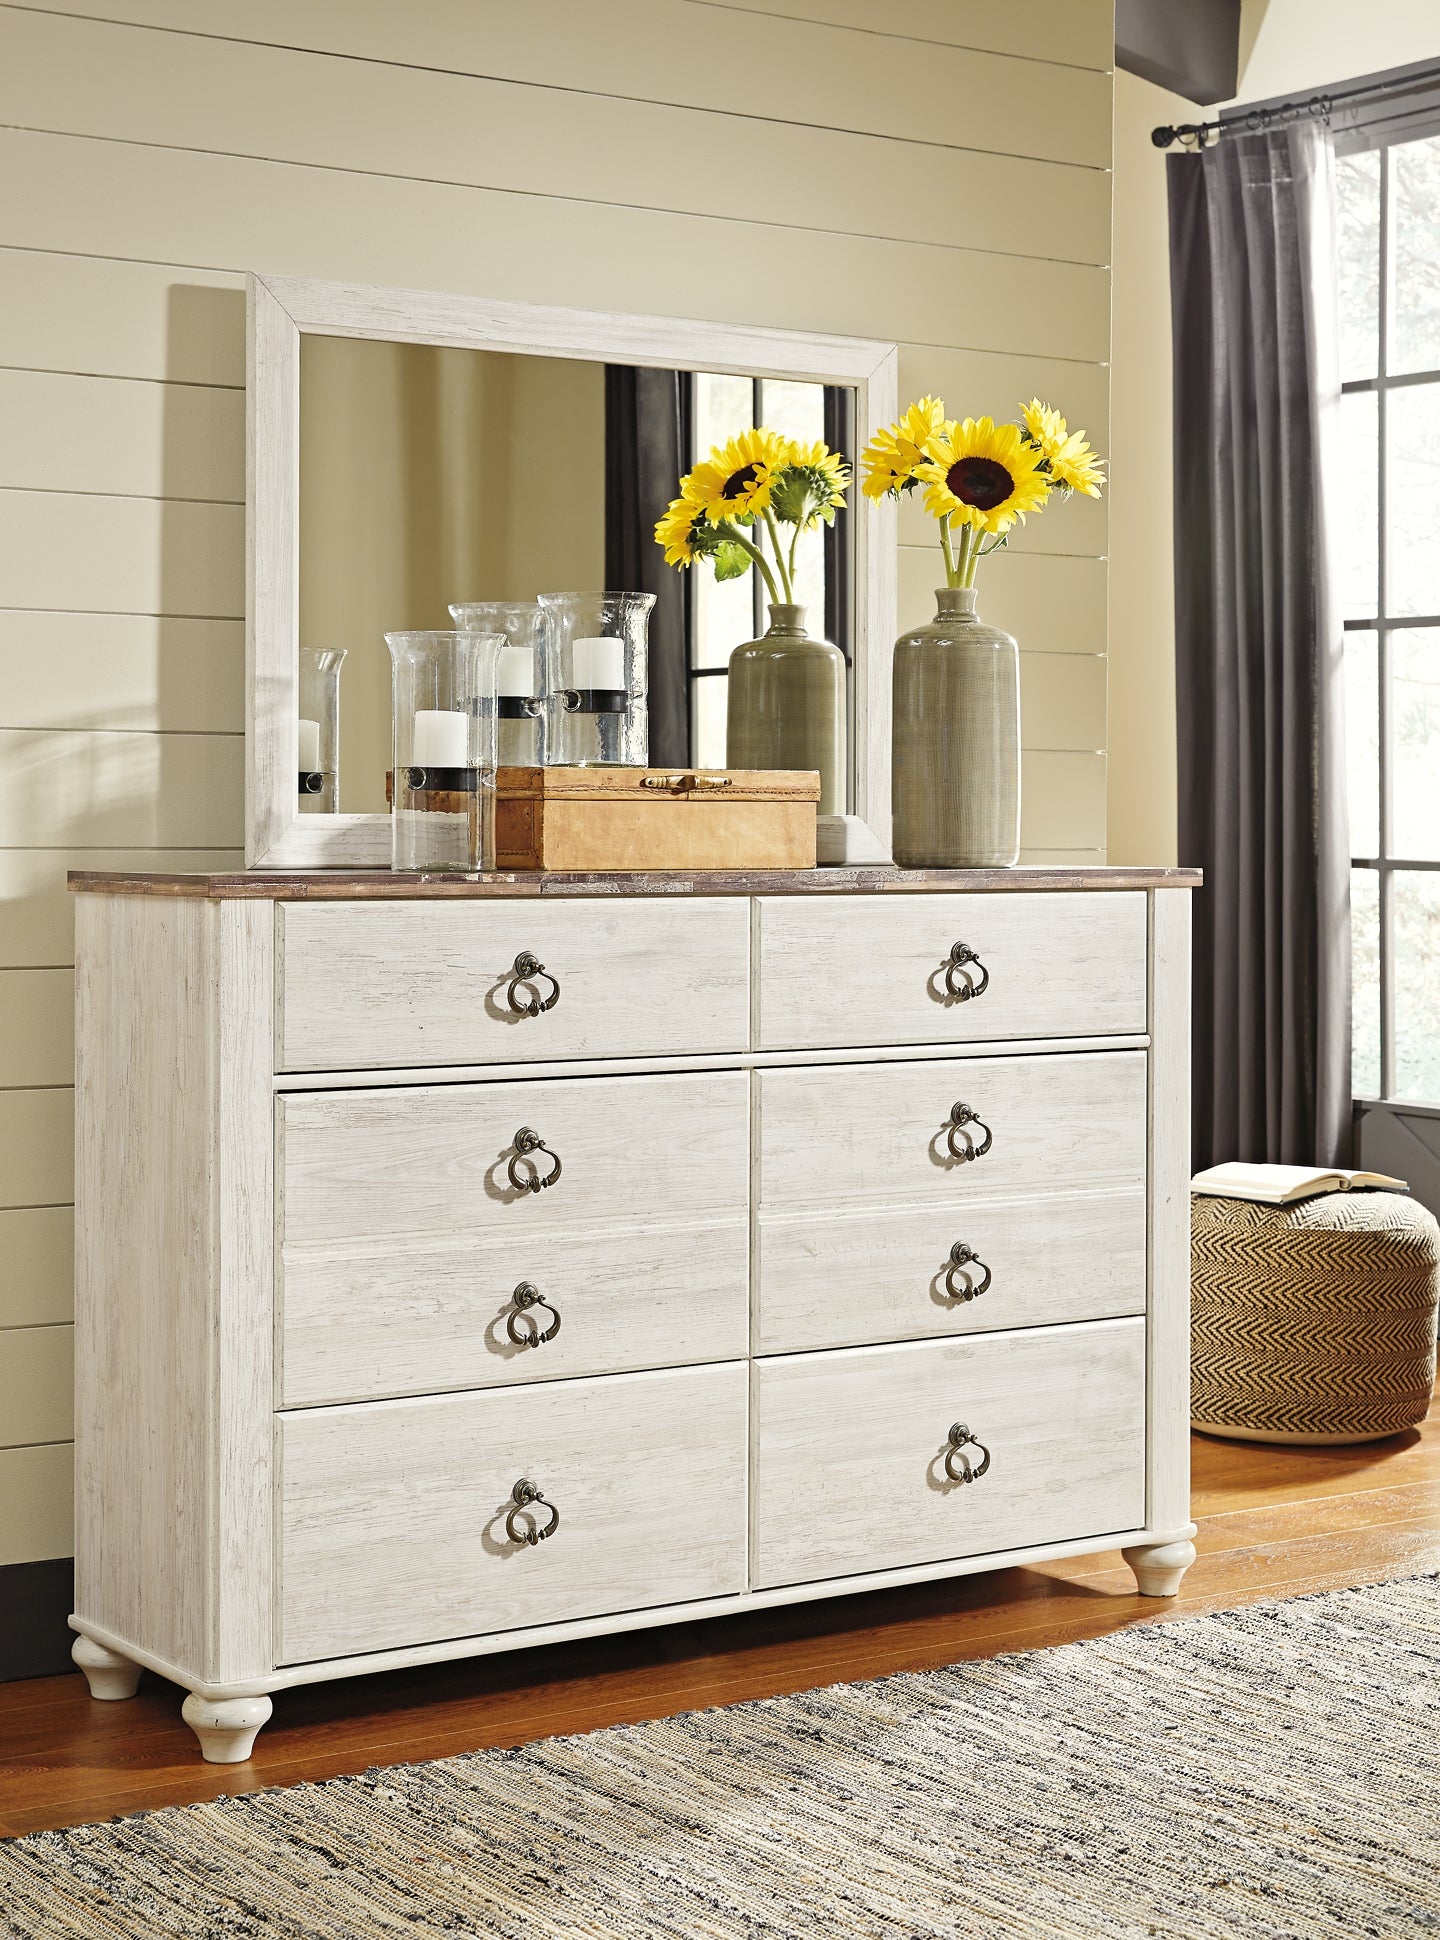 Willowton Queen Panel Bed with Mirrored Dresser, Chest and 2 Nightstands JB's Furniture  Home Furniture, Home Decor, Furniture Store